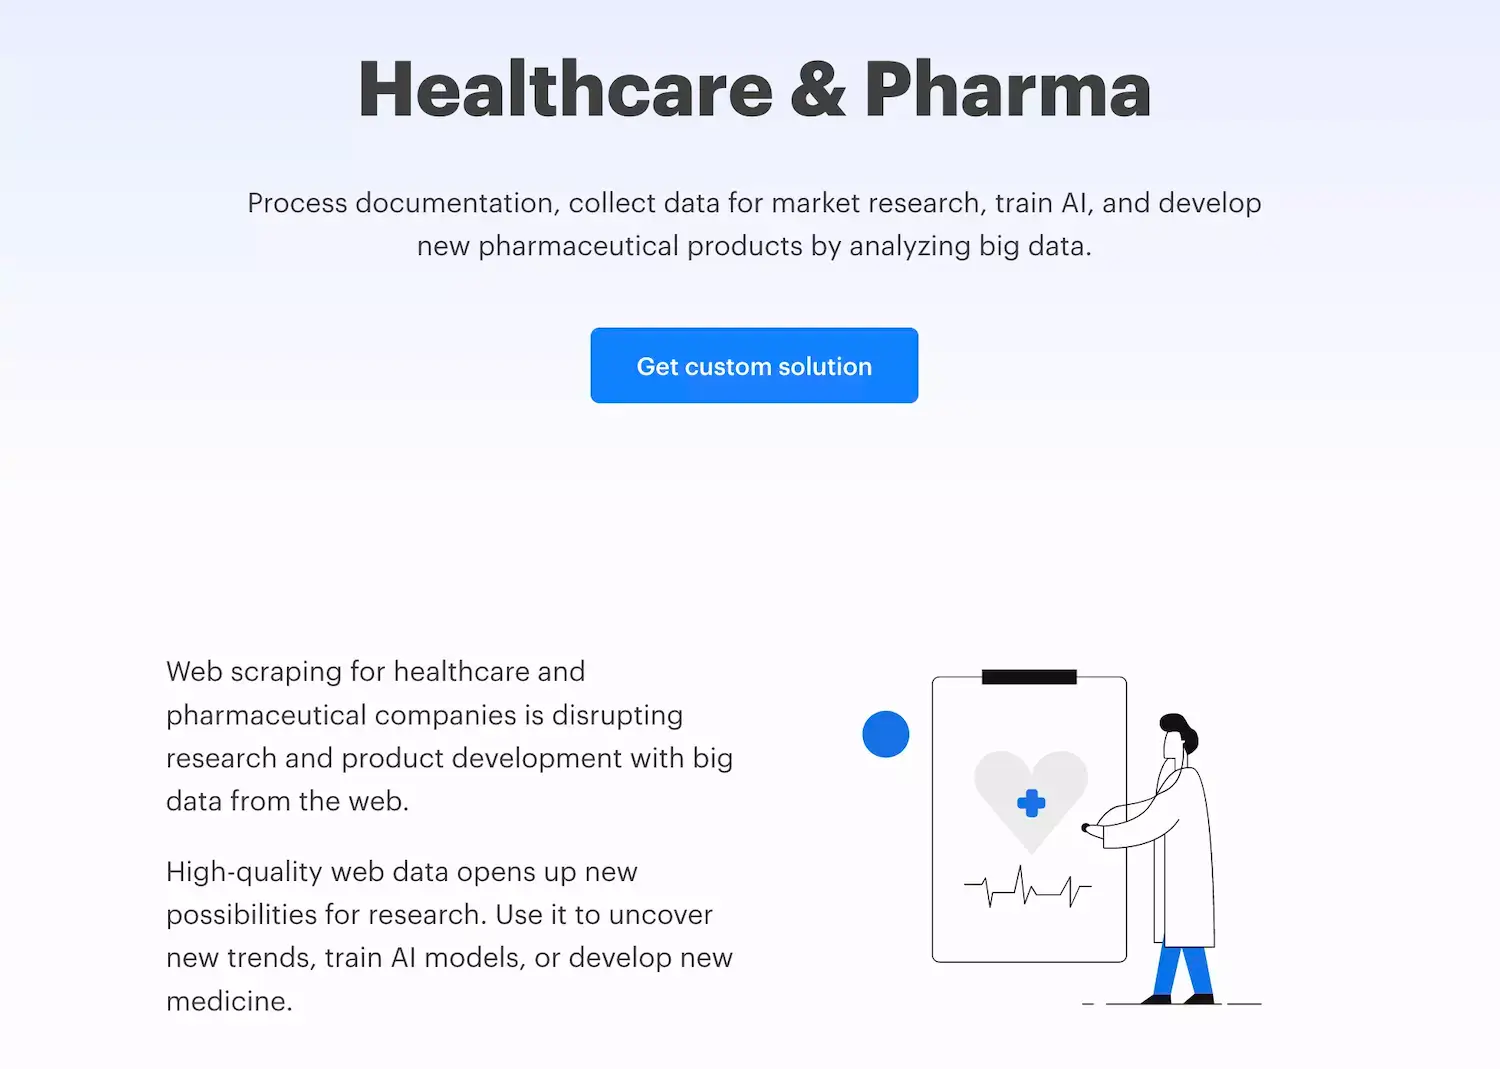 Apify's Healthcare & Pharma industry page is put together using Strapi